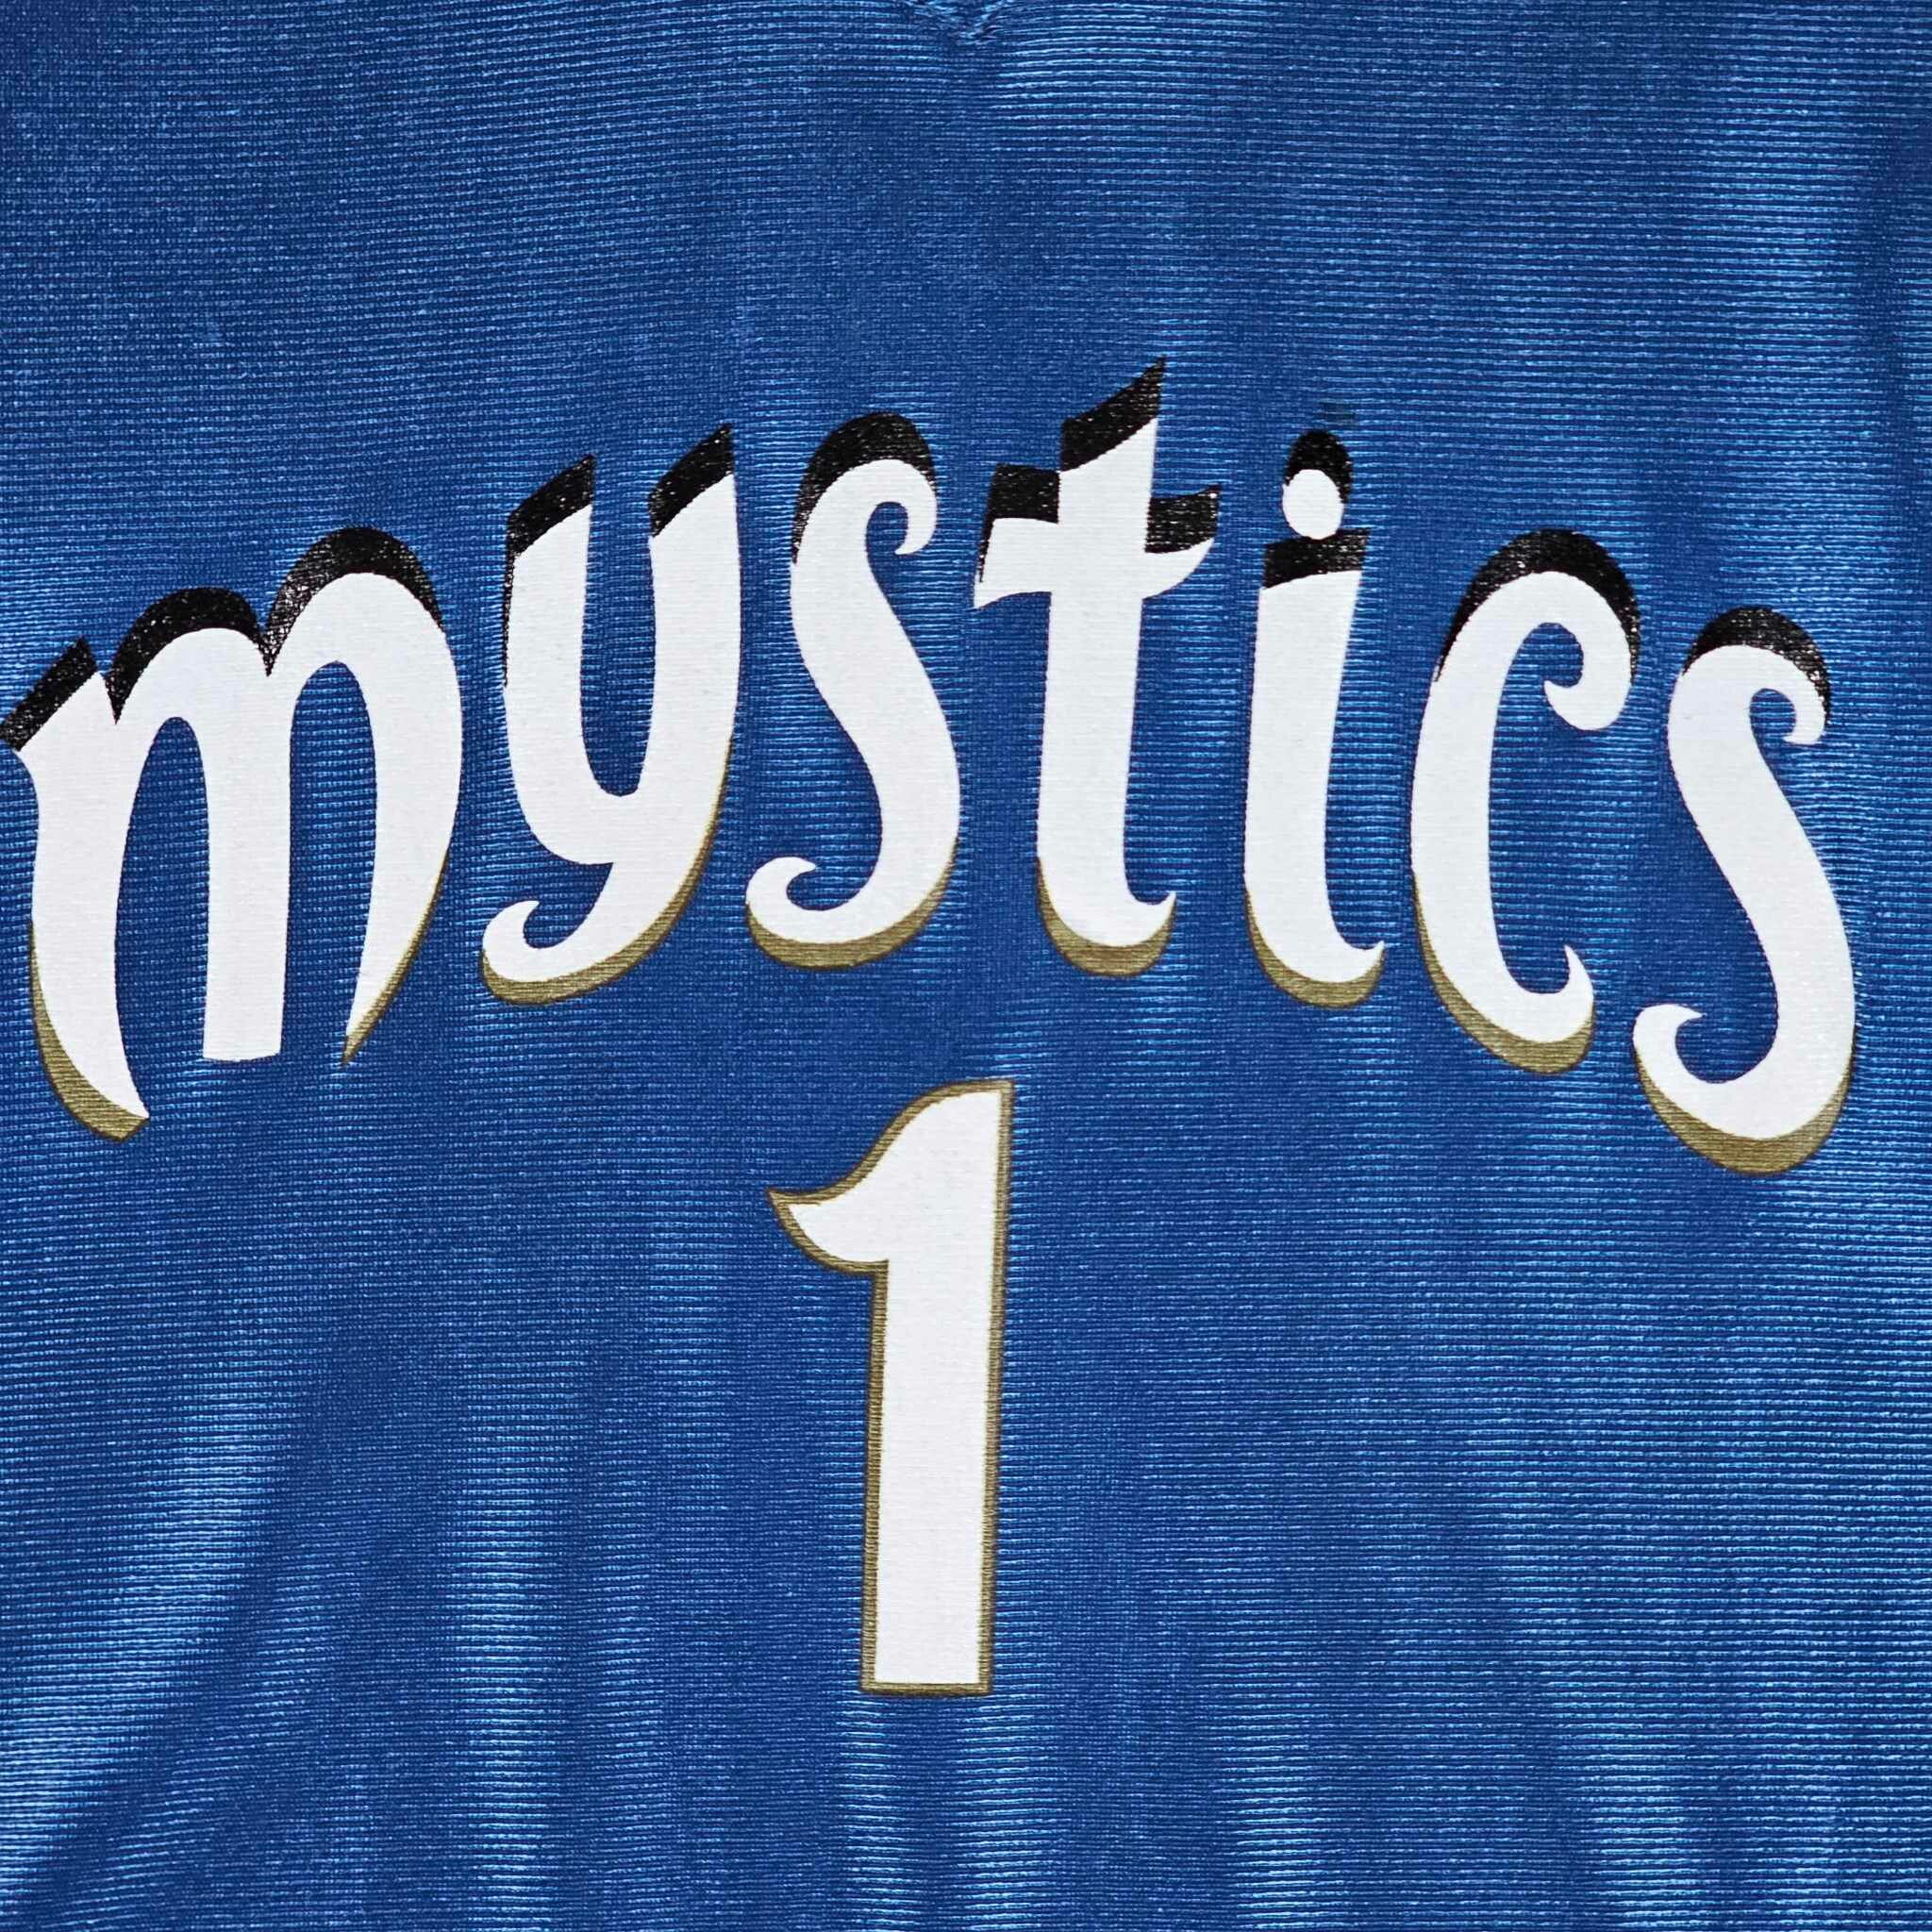 WNBA: The Mystics and all teams to have “City” Edition jerseys in